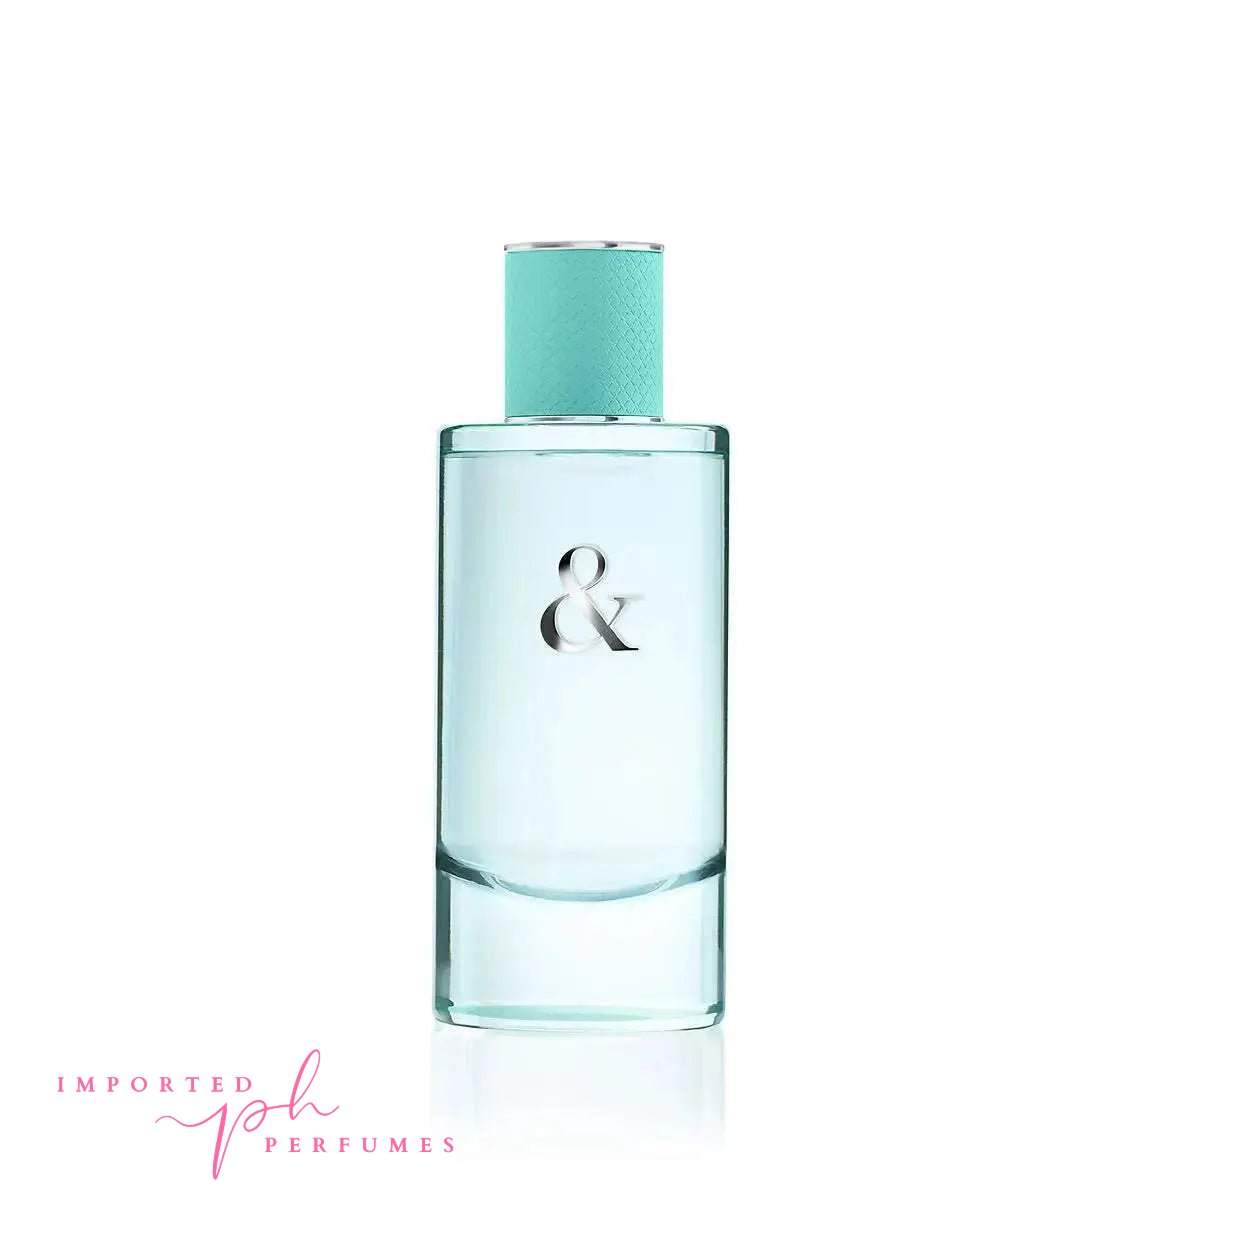 [TESTER] Tiffany & Love For Her Eau De Parfum 90ml For Women-Imported Perfumes Co-TESTER,Tiffany,Tiffany & Co,women